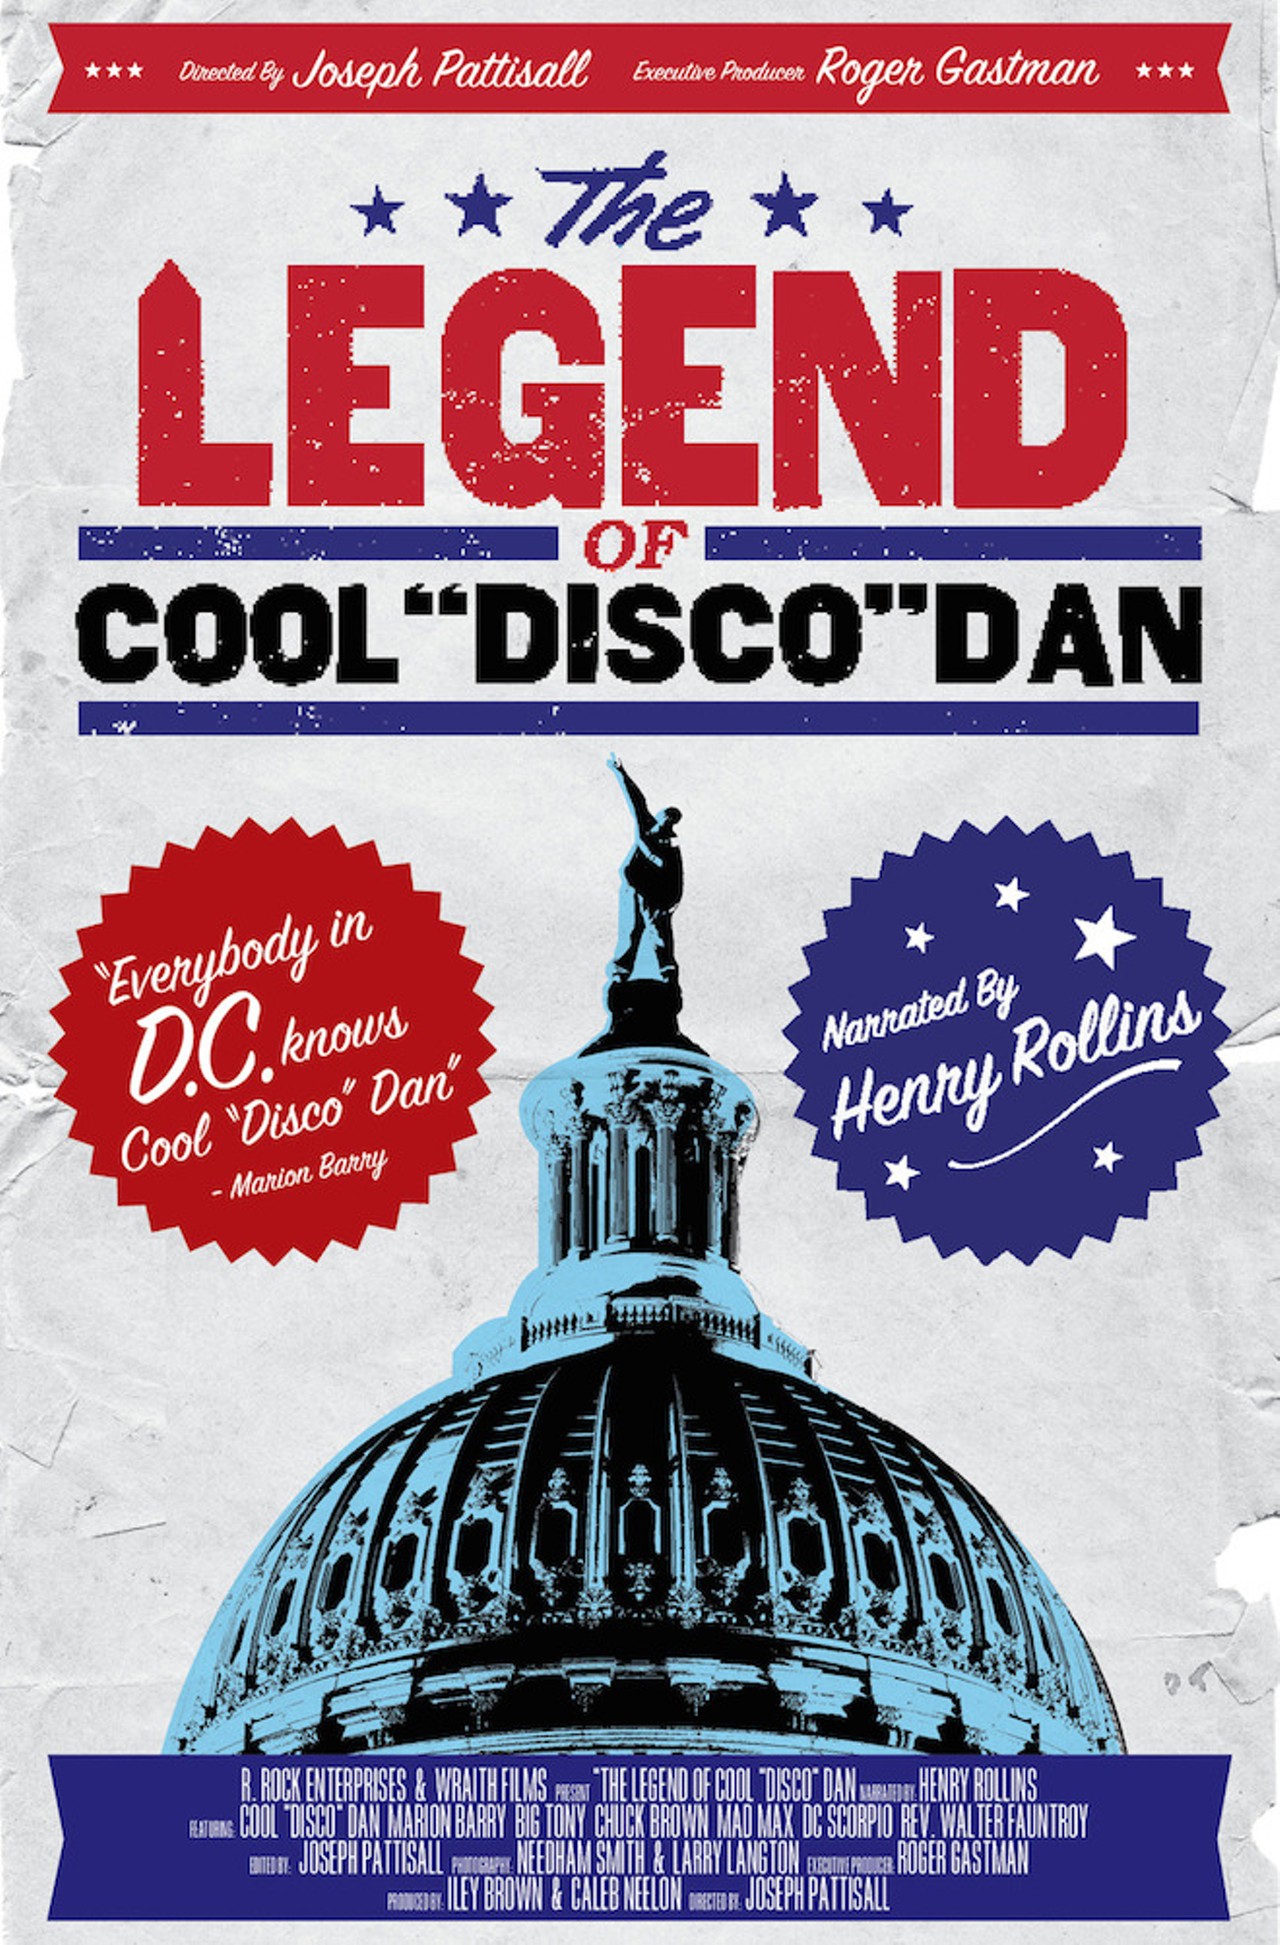 Thursday, Oct. 9The Legend of Cool Disco DanThe story of black Washington DC told from the perspective of one man who used graffiti to escape his problems